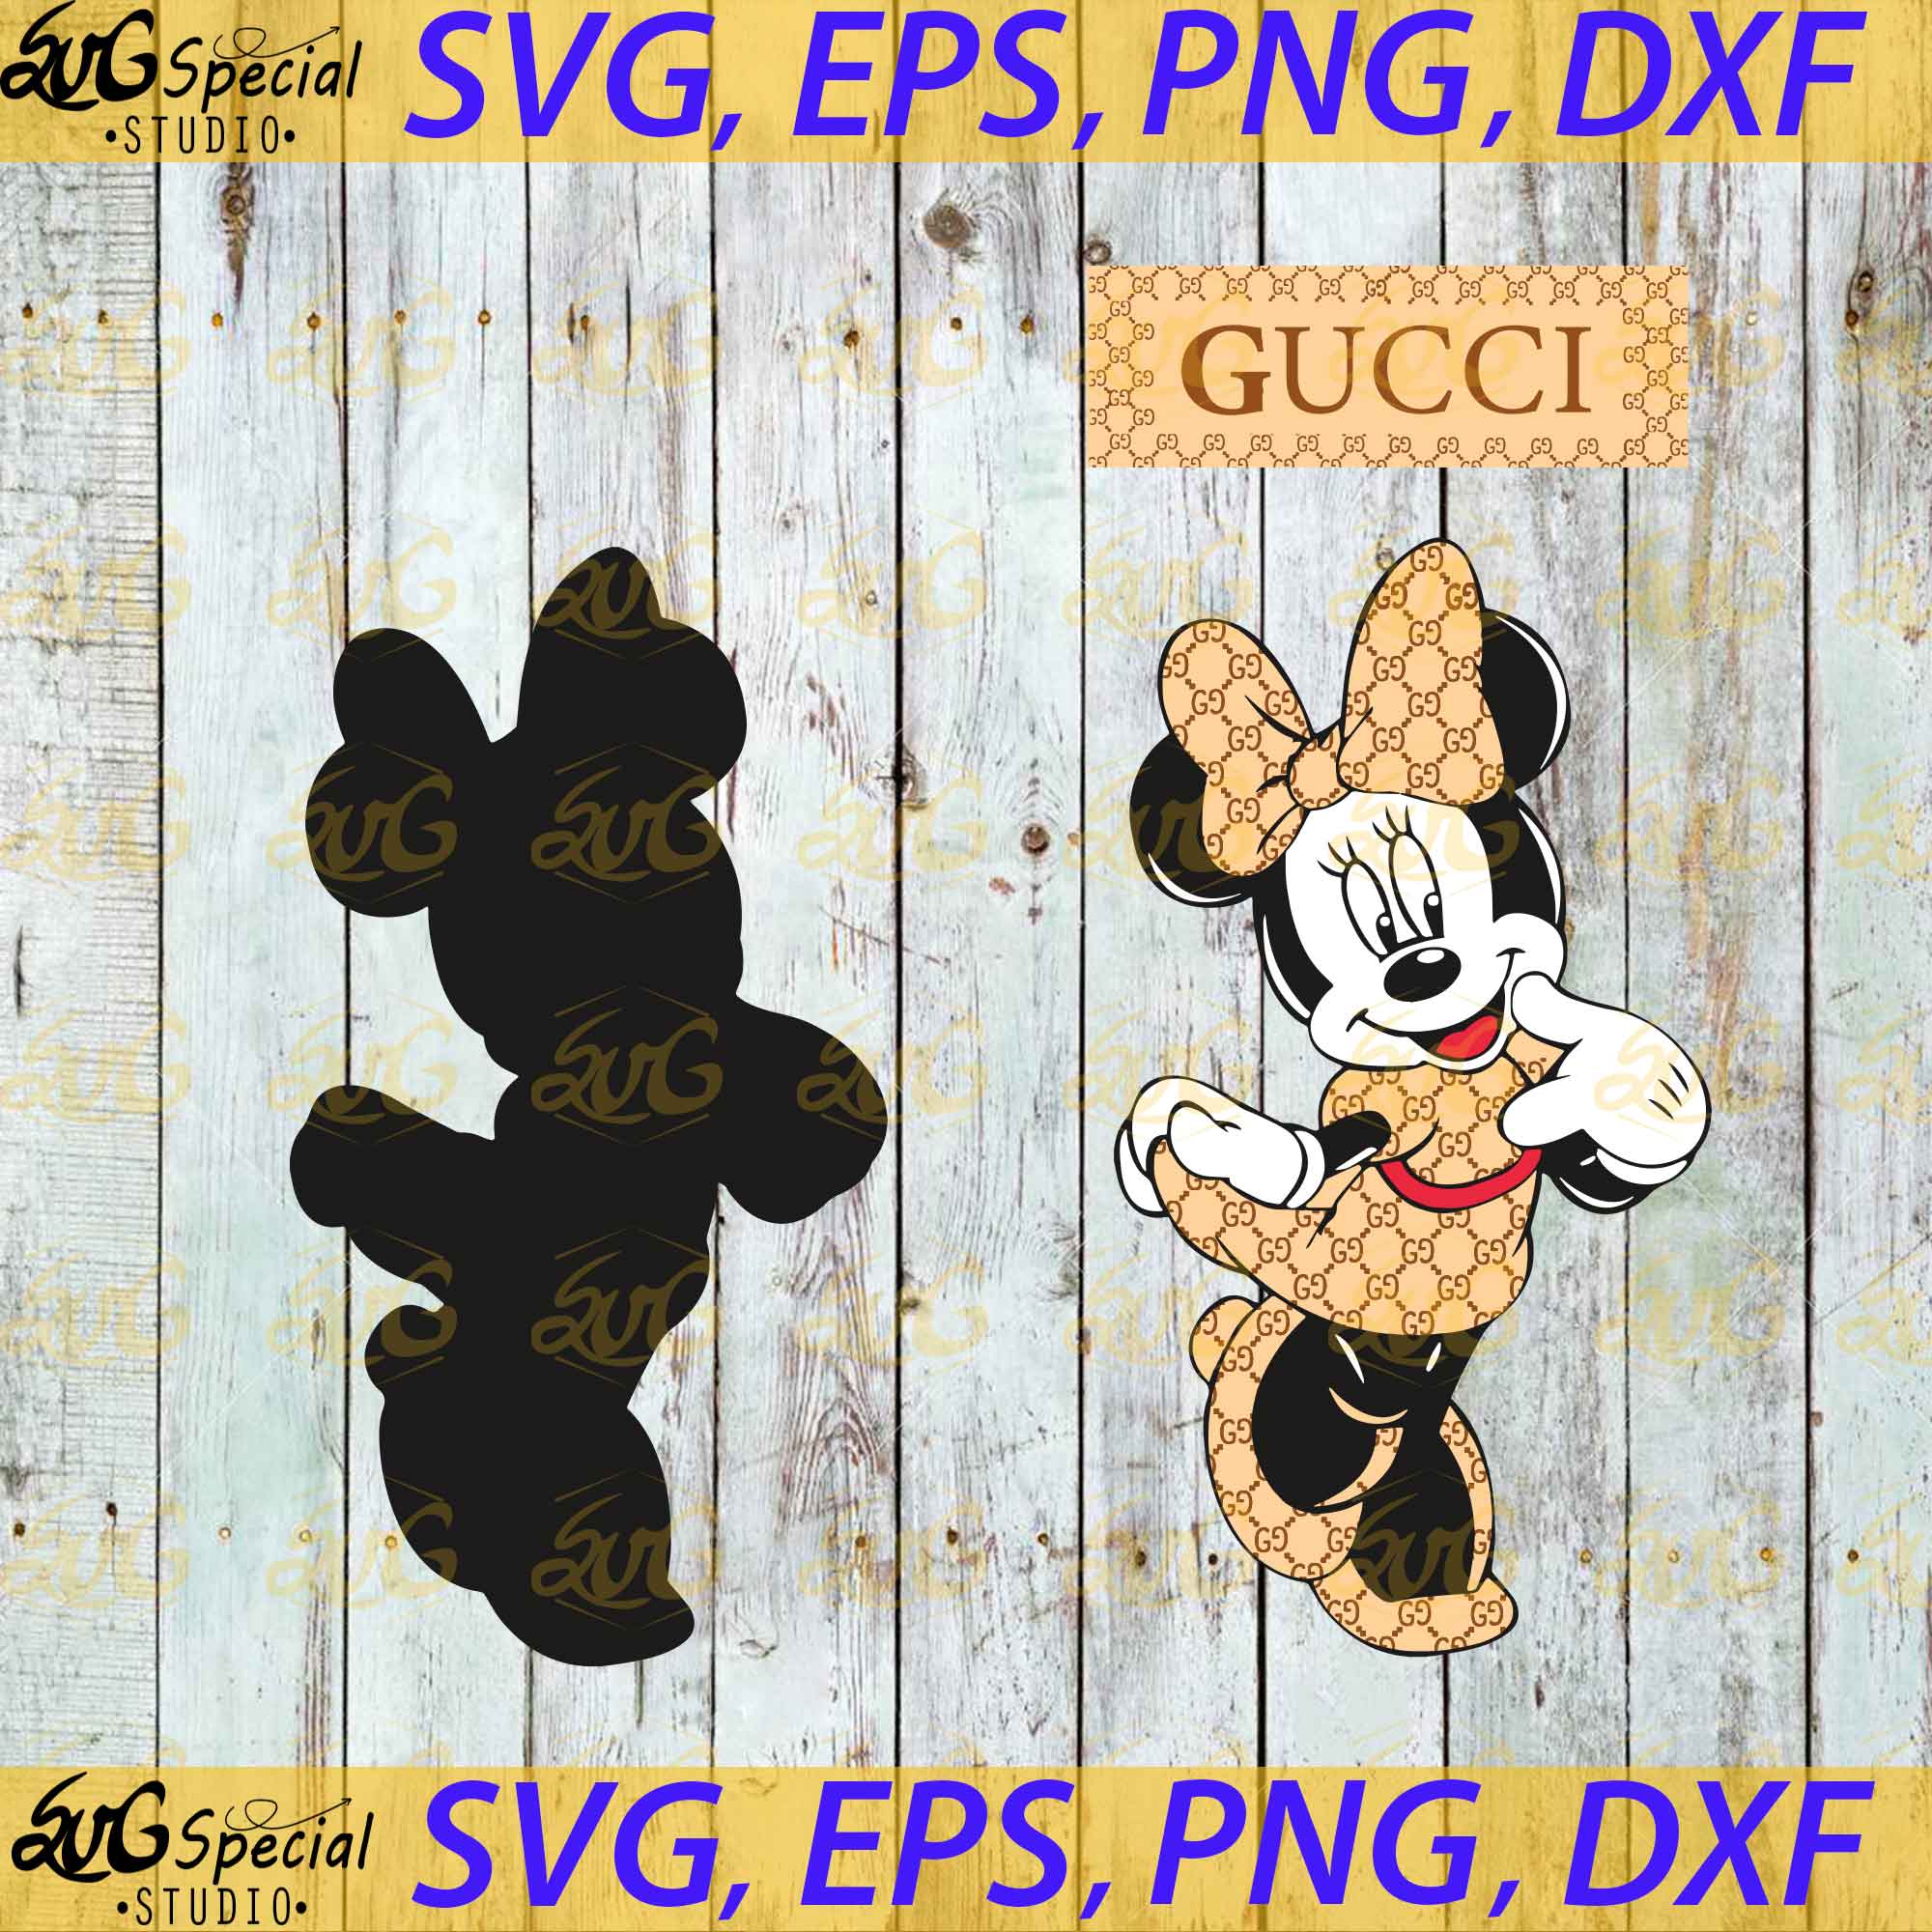 Gucci Mickey And Minnie Png, Gucci Brand Png, Disney Gucci P